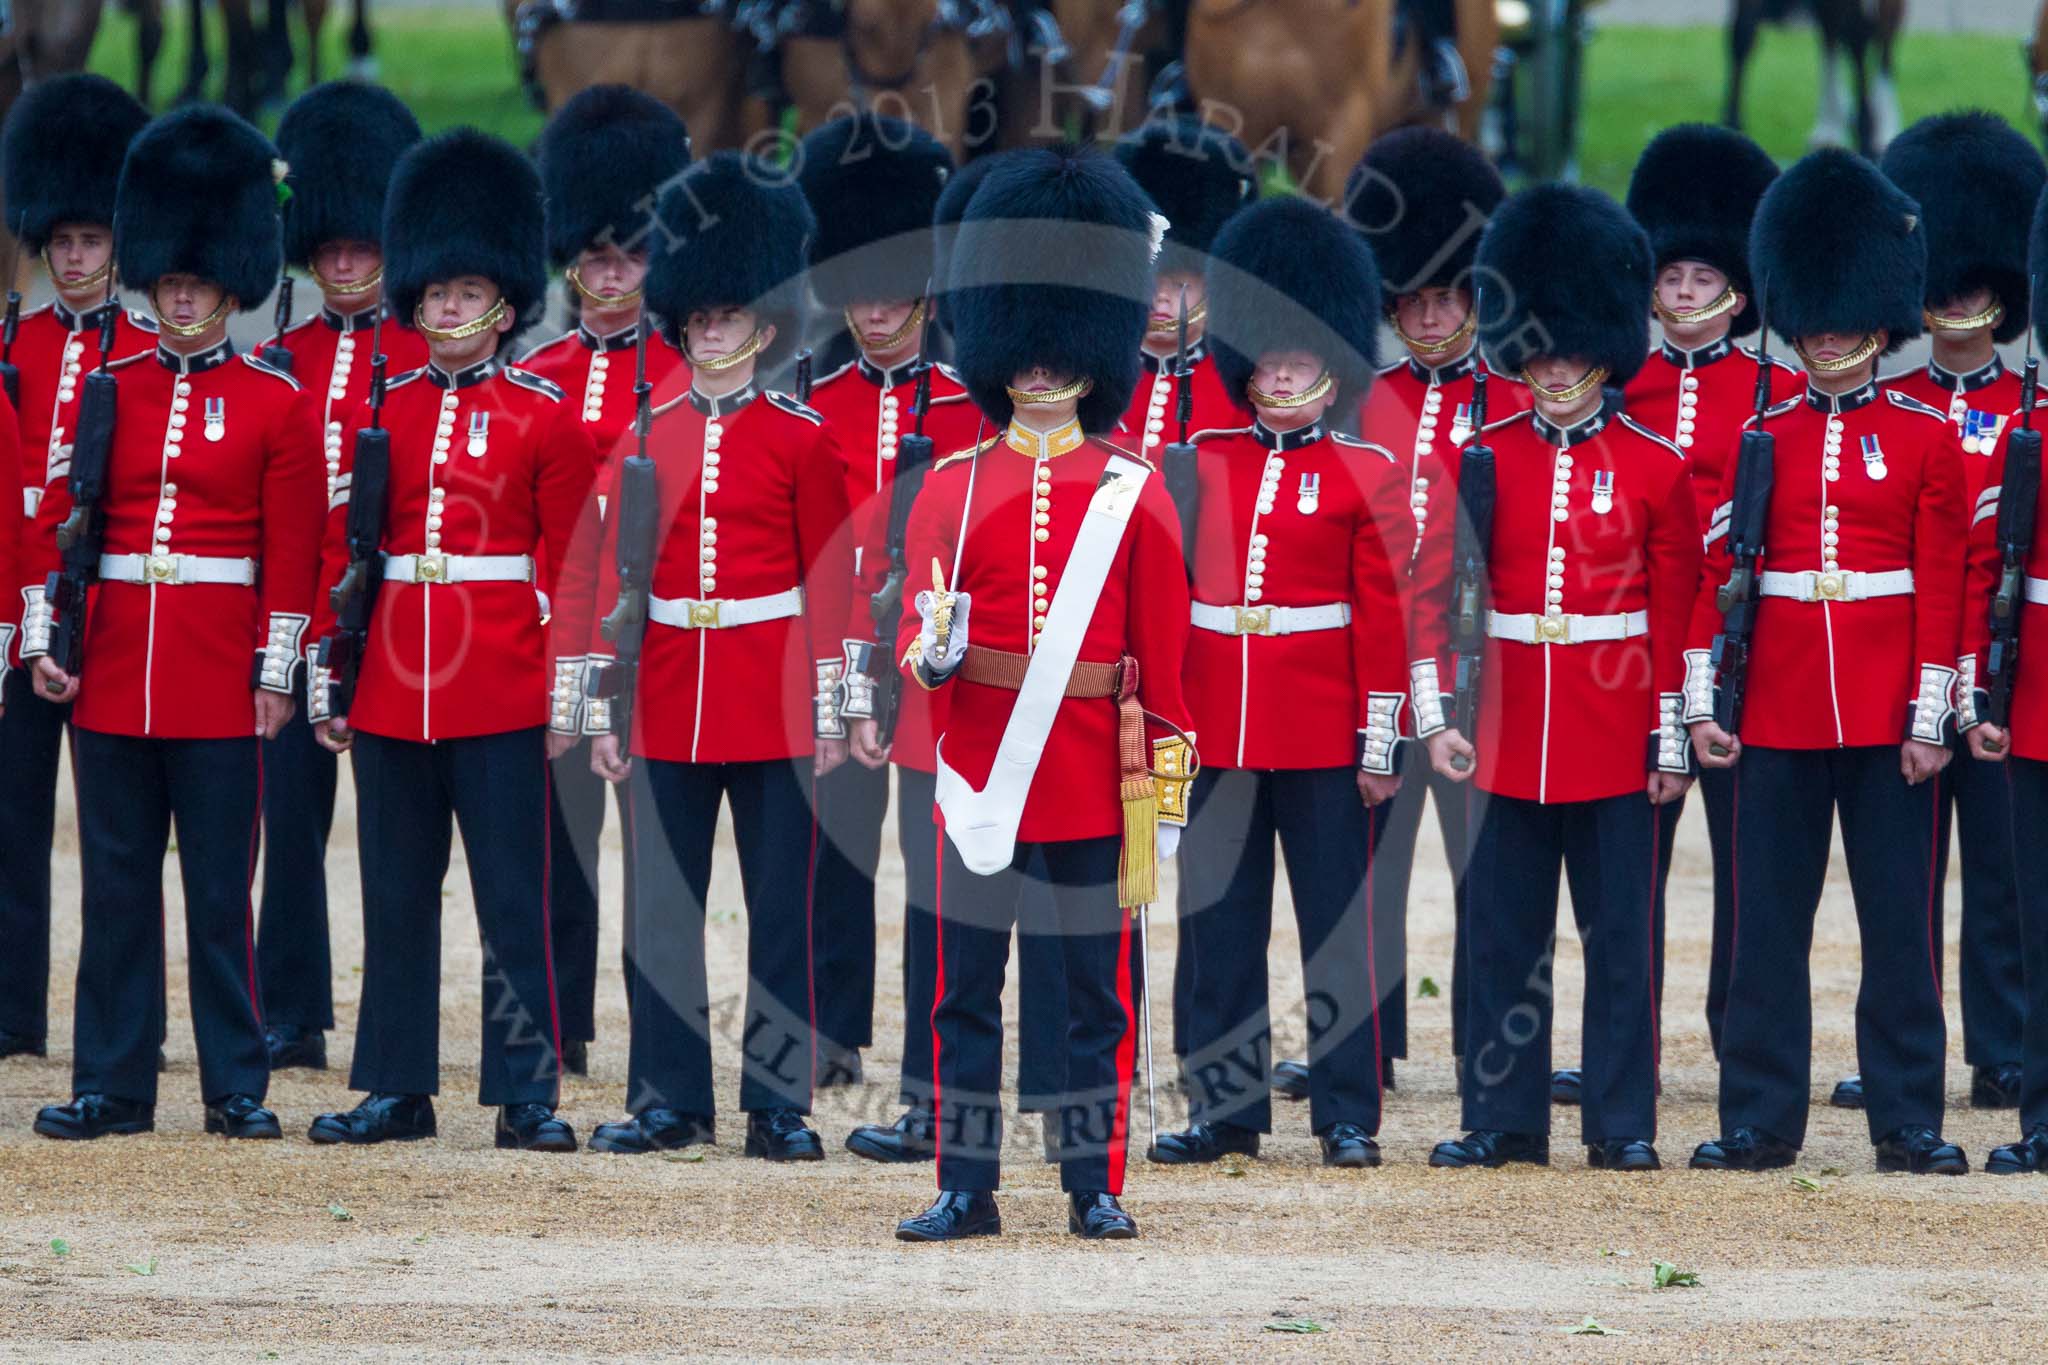 Trooping the Colour 2015. Image #168, 13 June 2015 10:45 Horse Guards Parade, London, UK